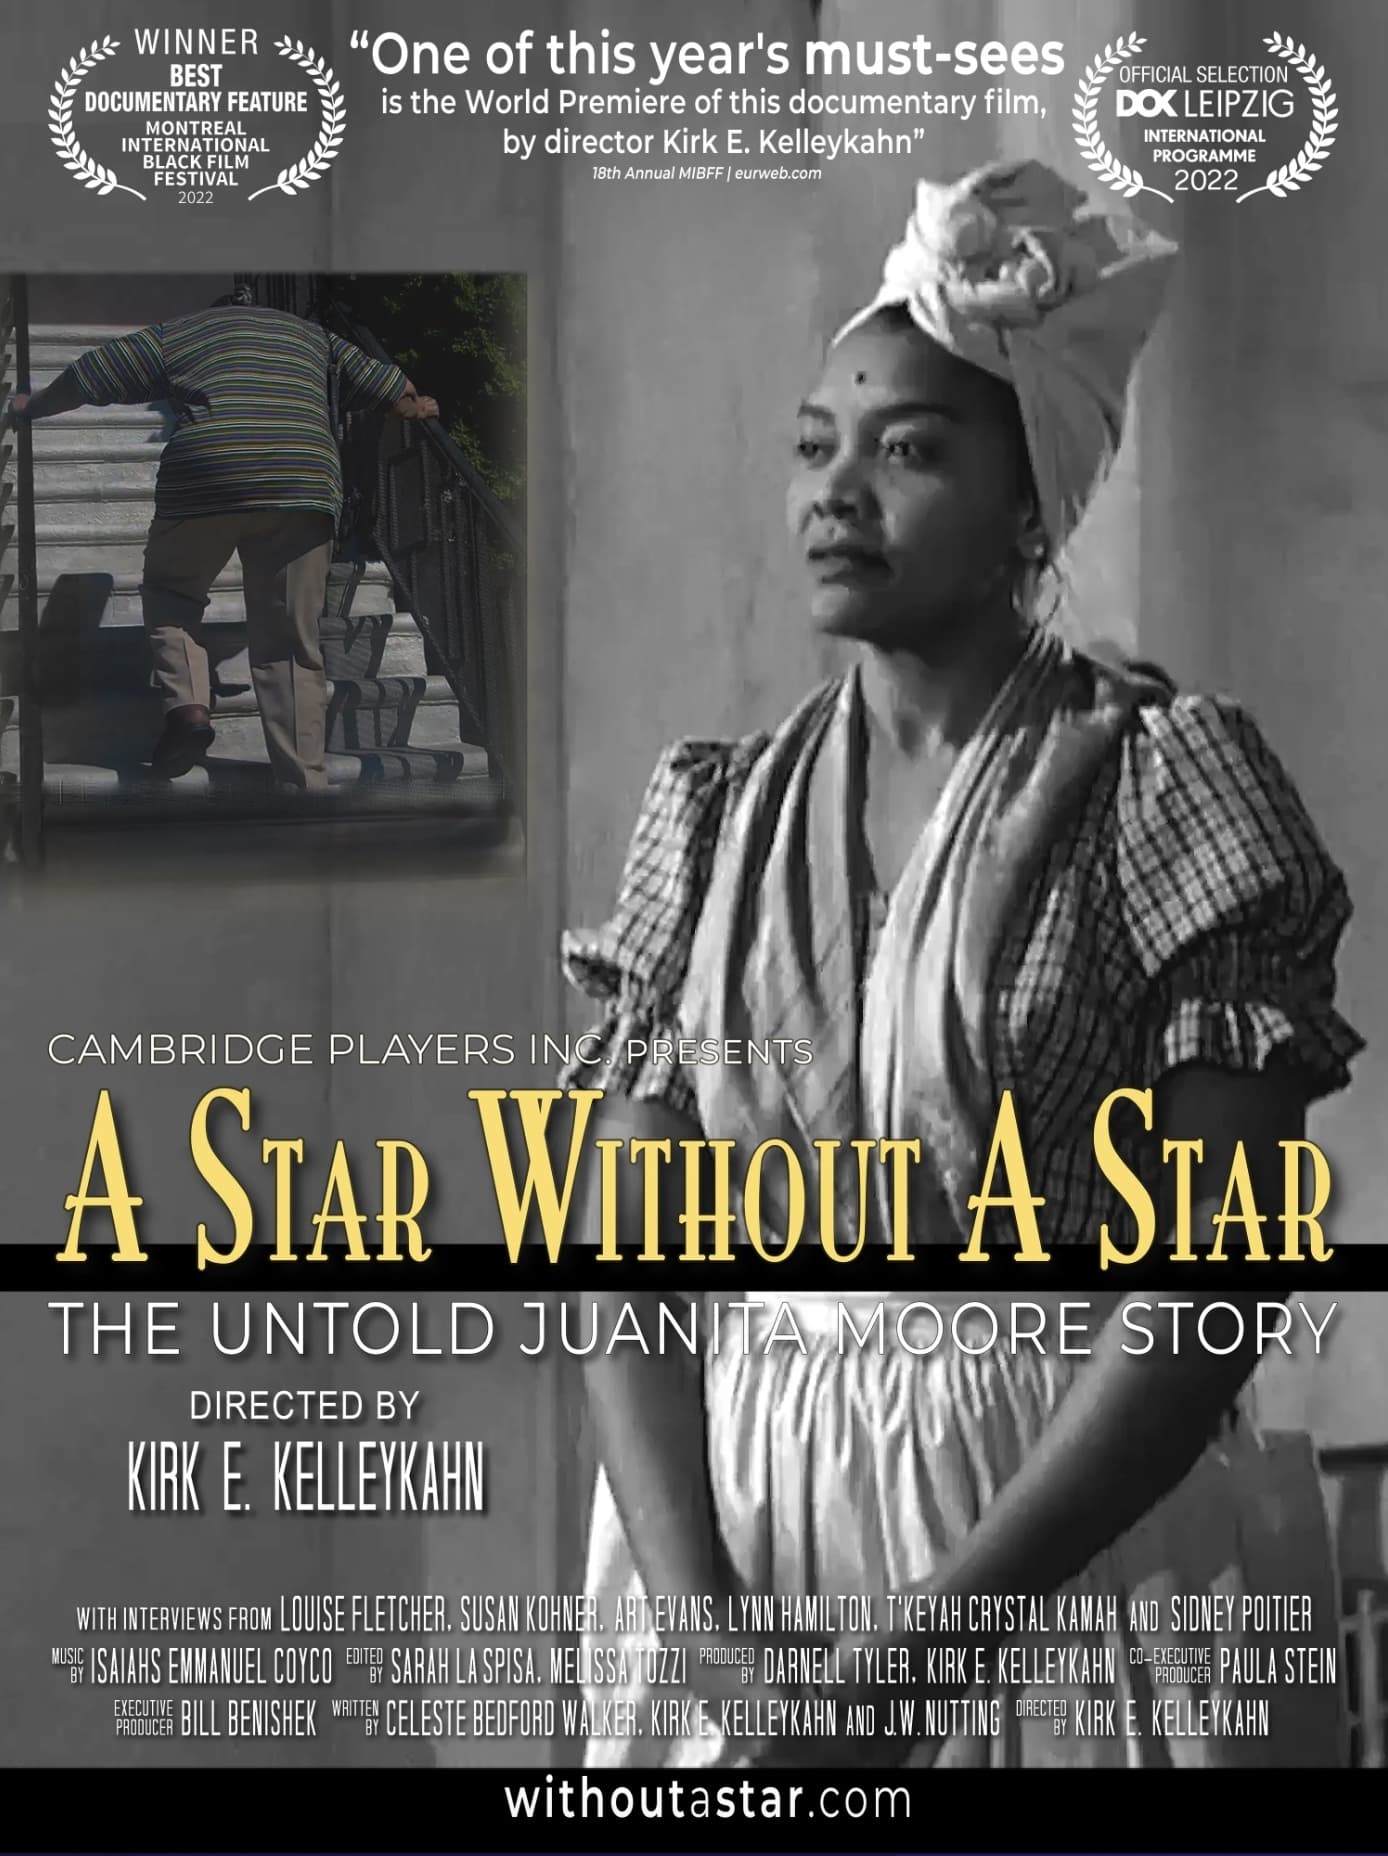 A Star Without a Star: The Untold Juanita Moore Story